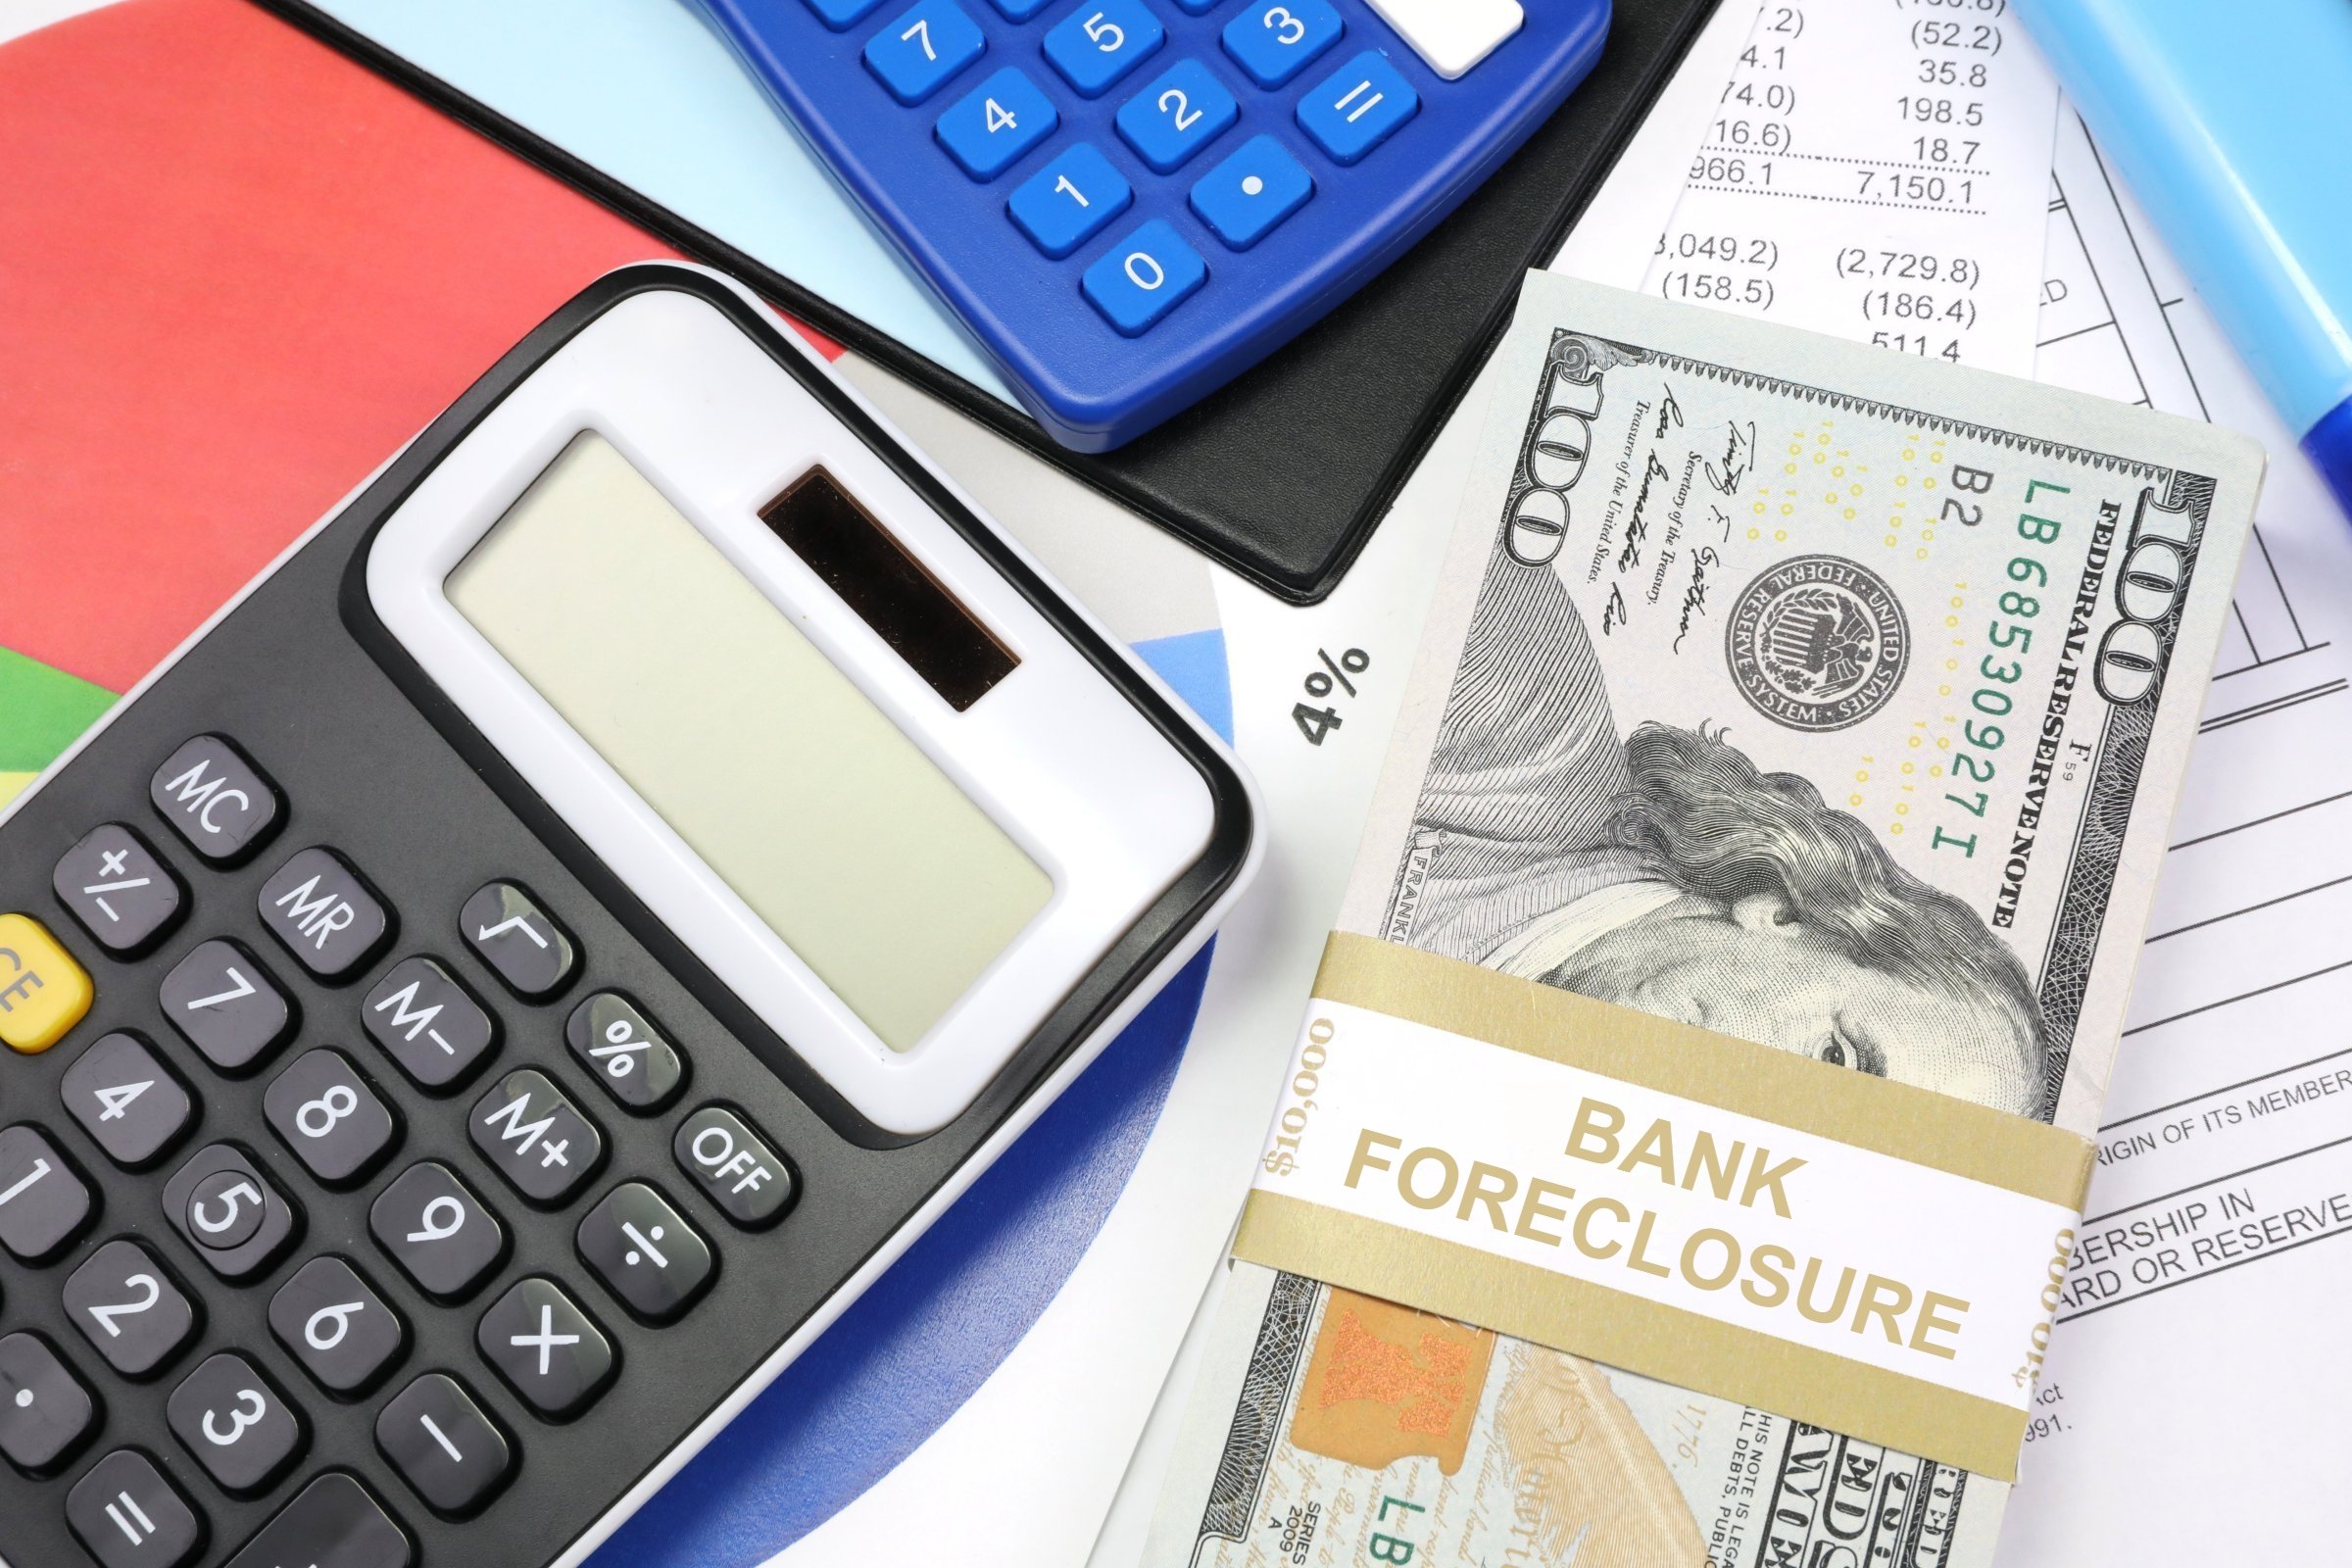 Bank foreclosure affects